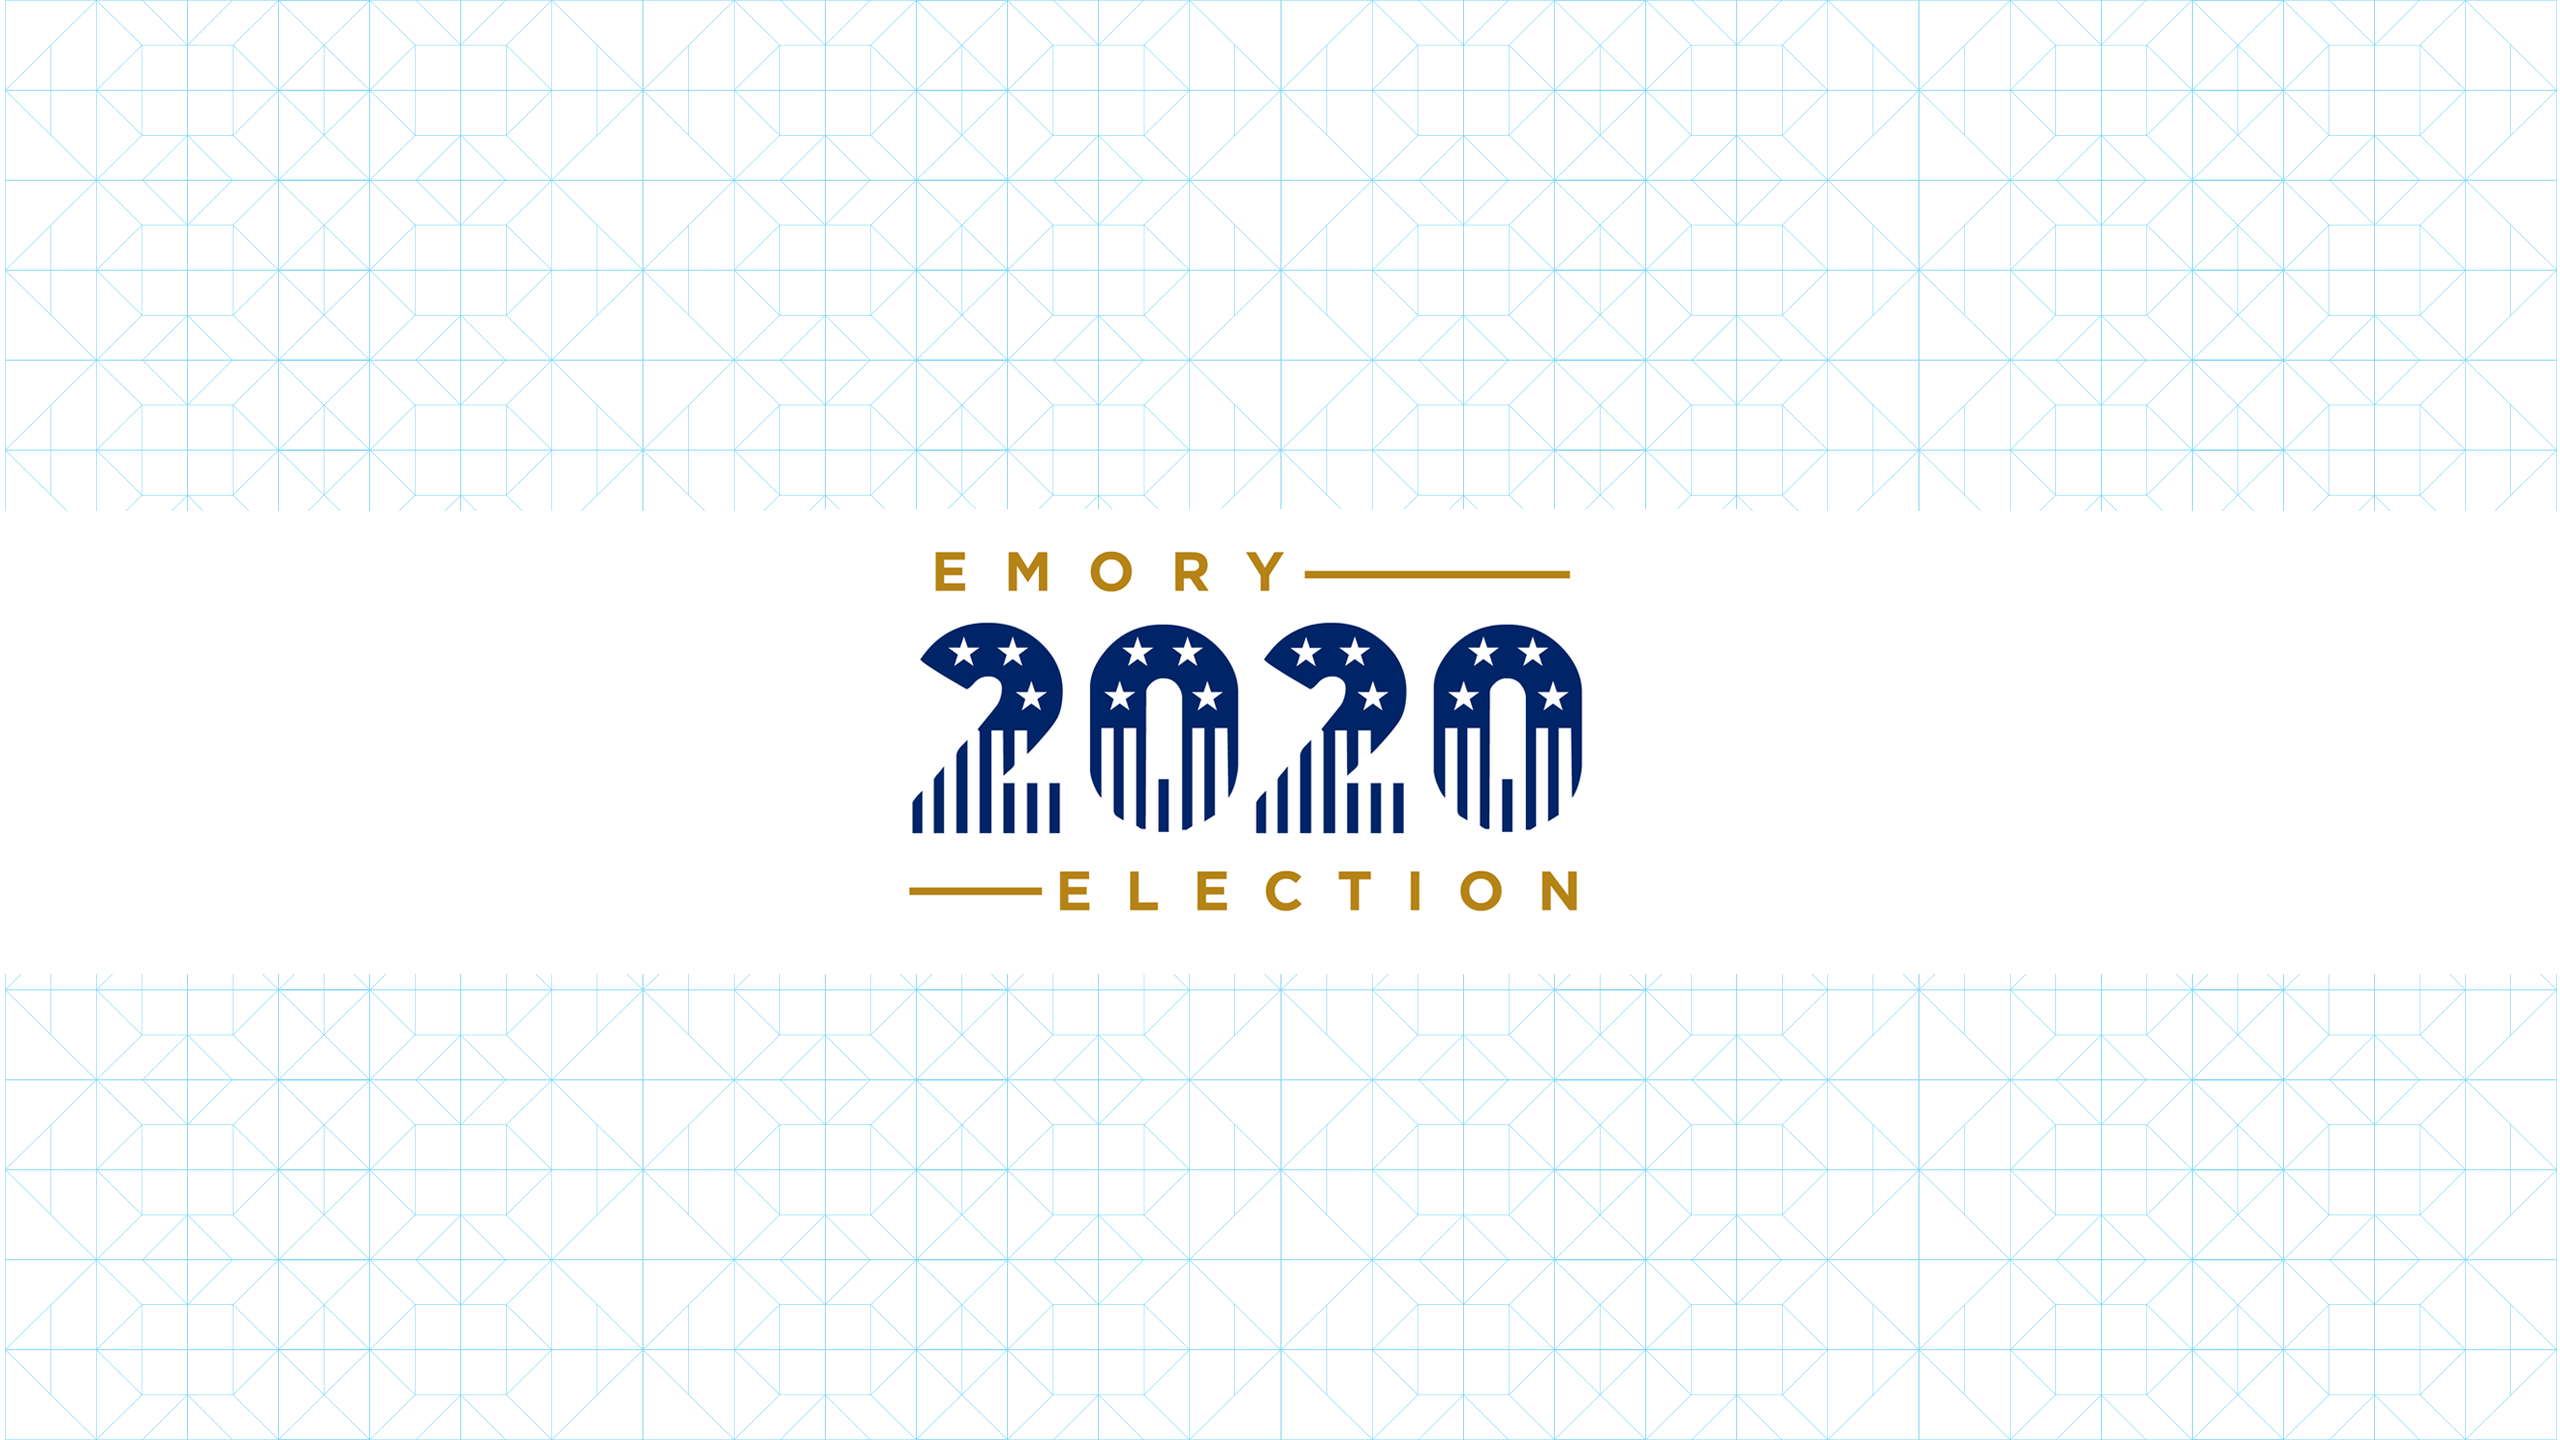 Emory Election event graphic